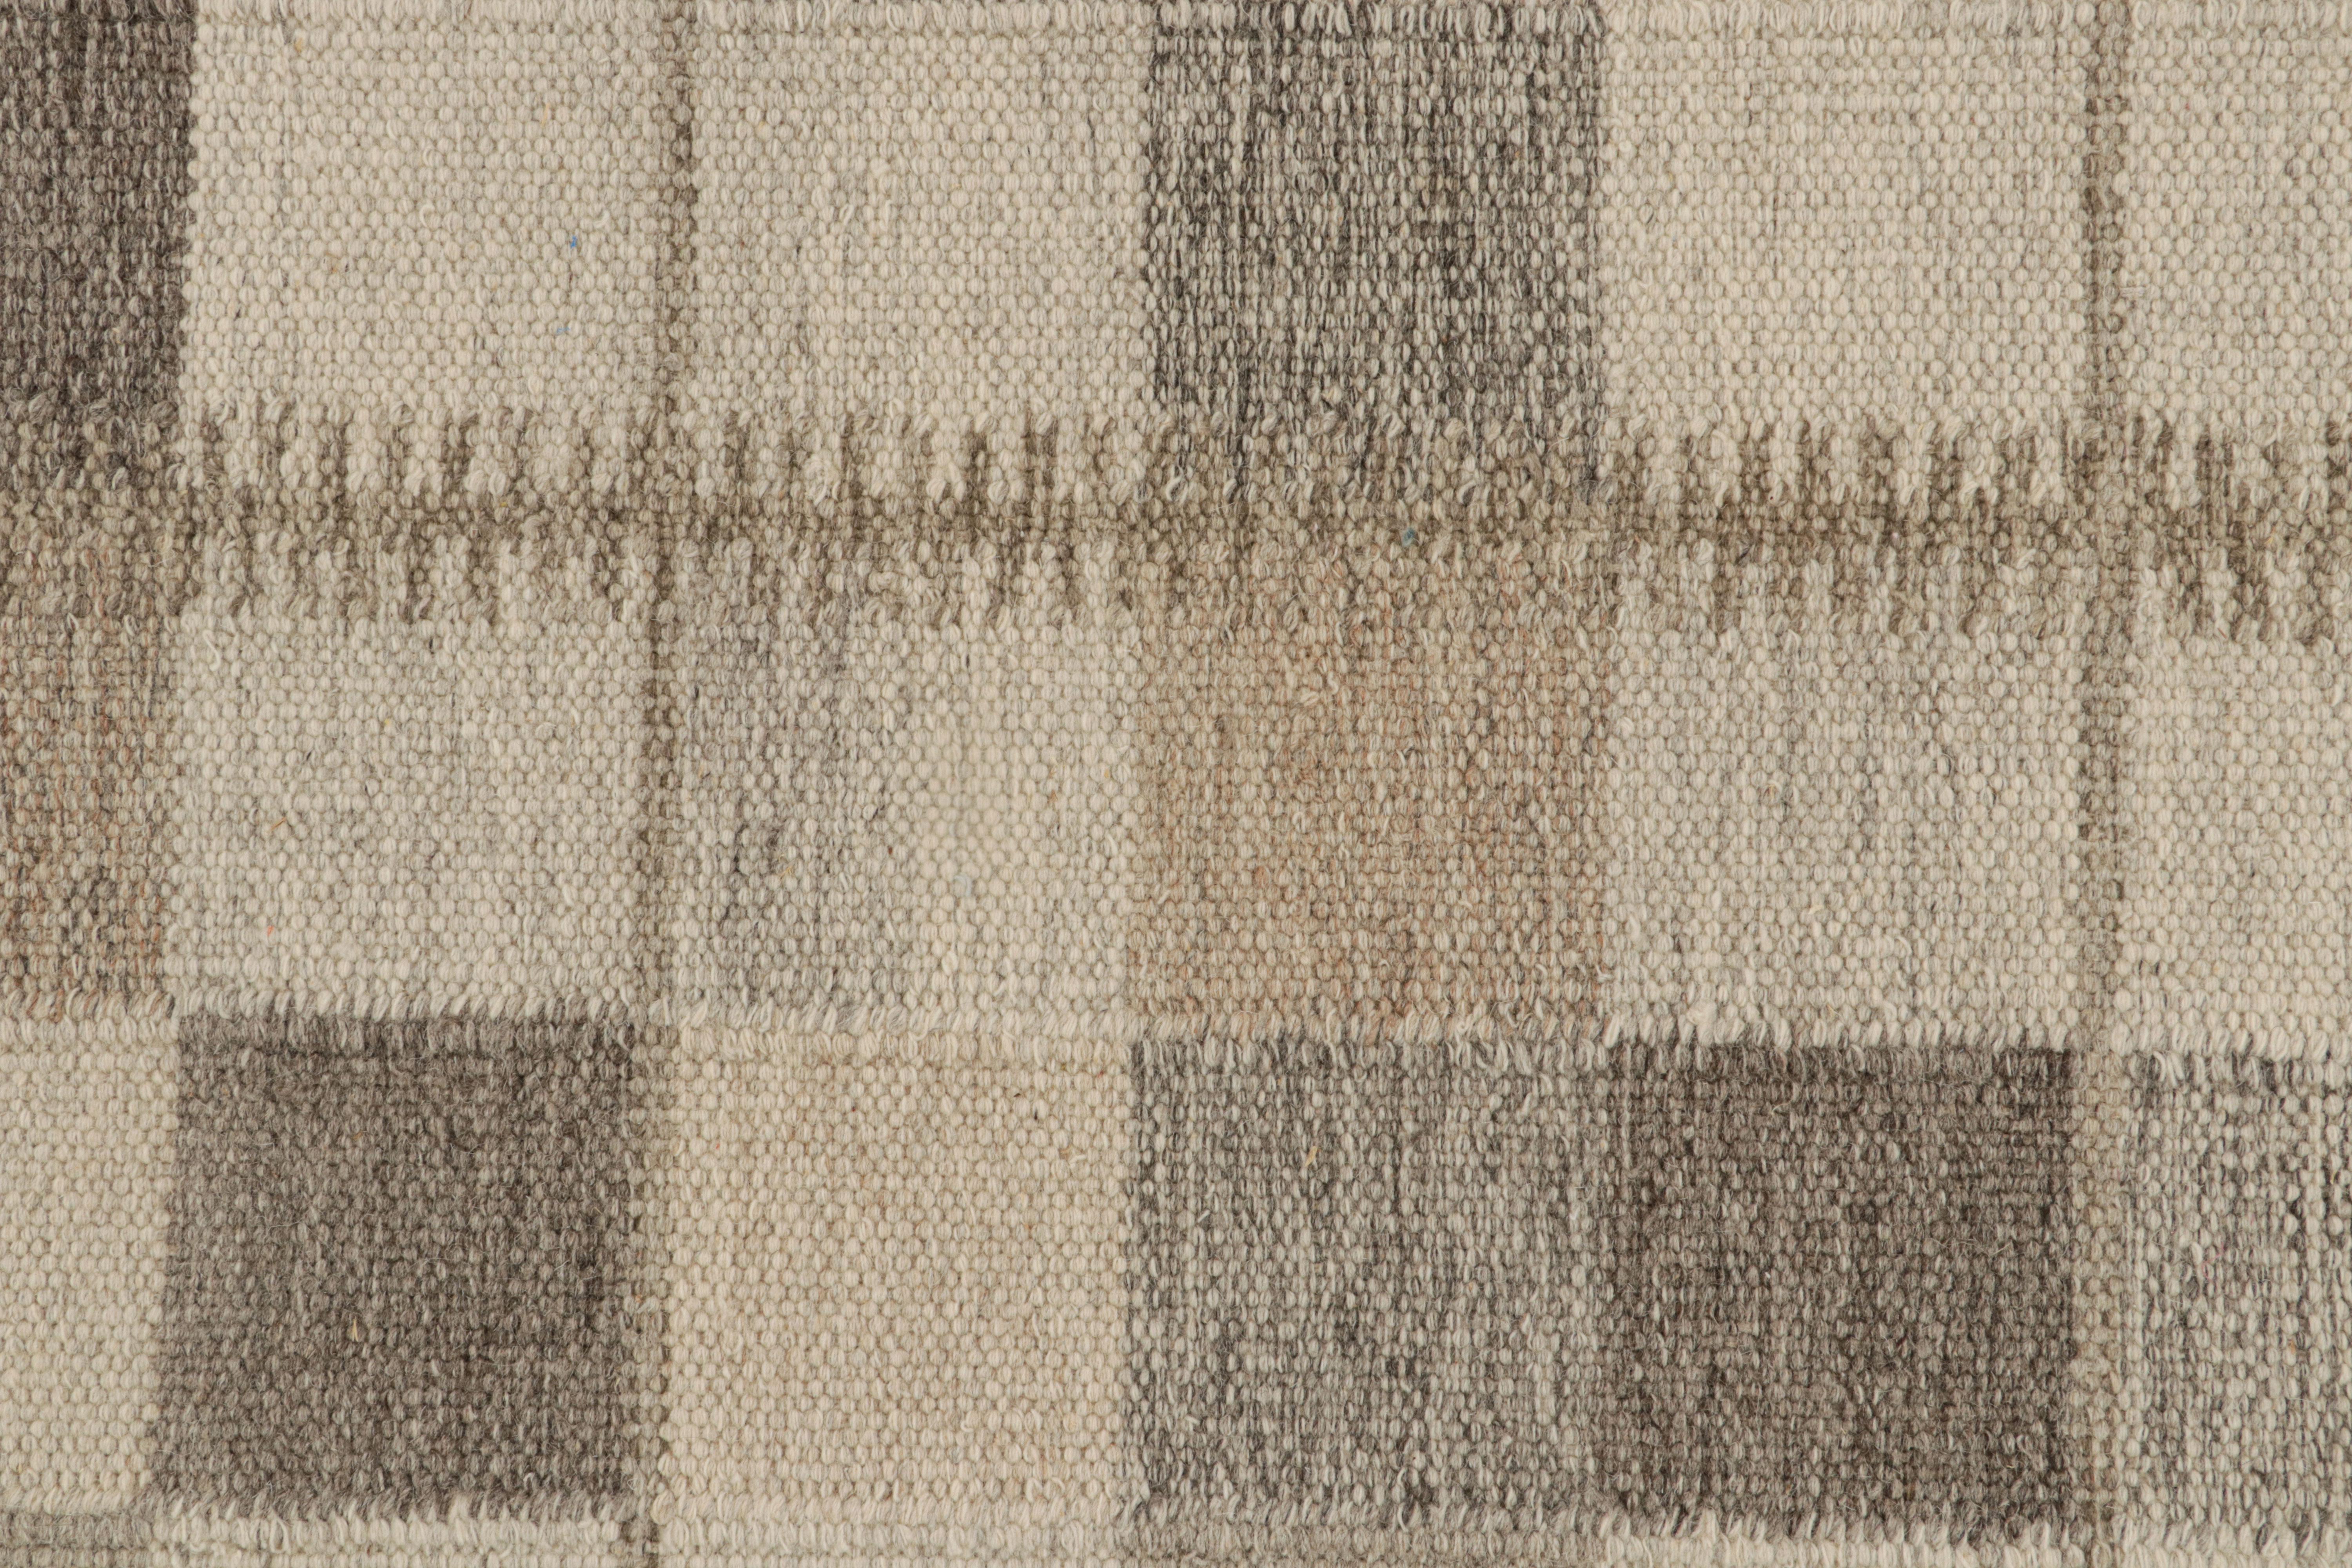 Rug & Kilim’s Scandinavian Rug With Beige-Brown Geometric Patterns In New Condition For Sale In Long Island City, NY